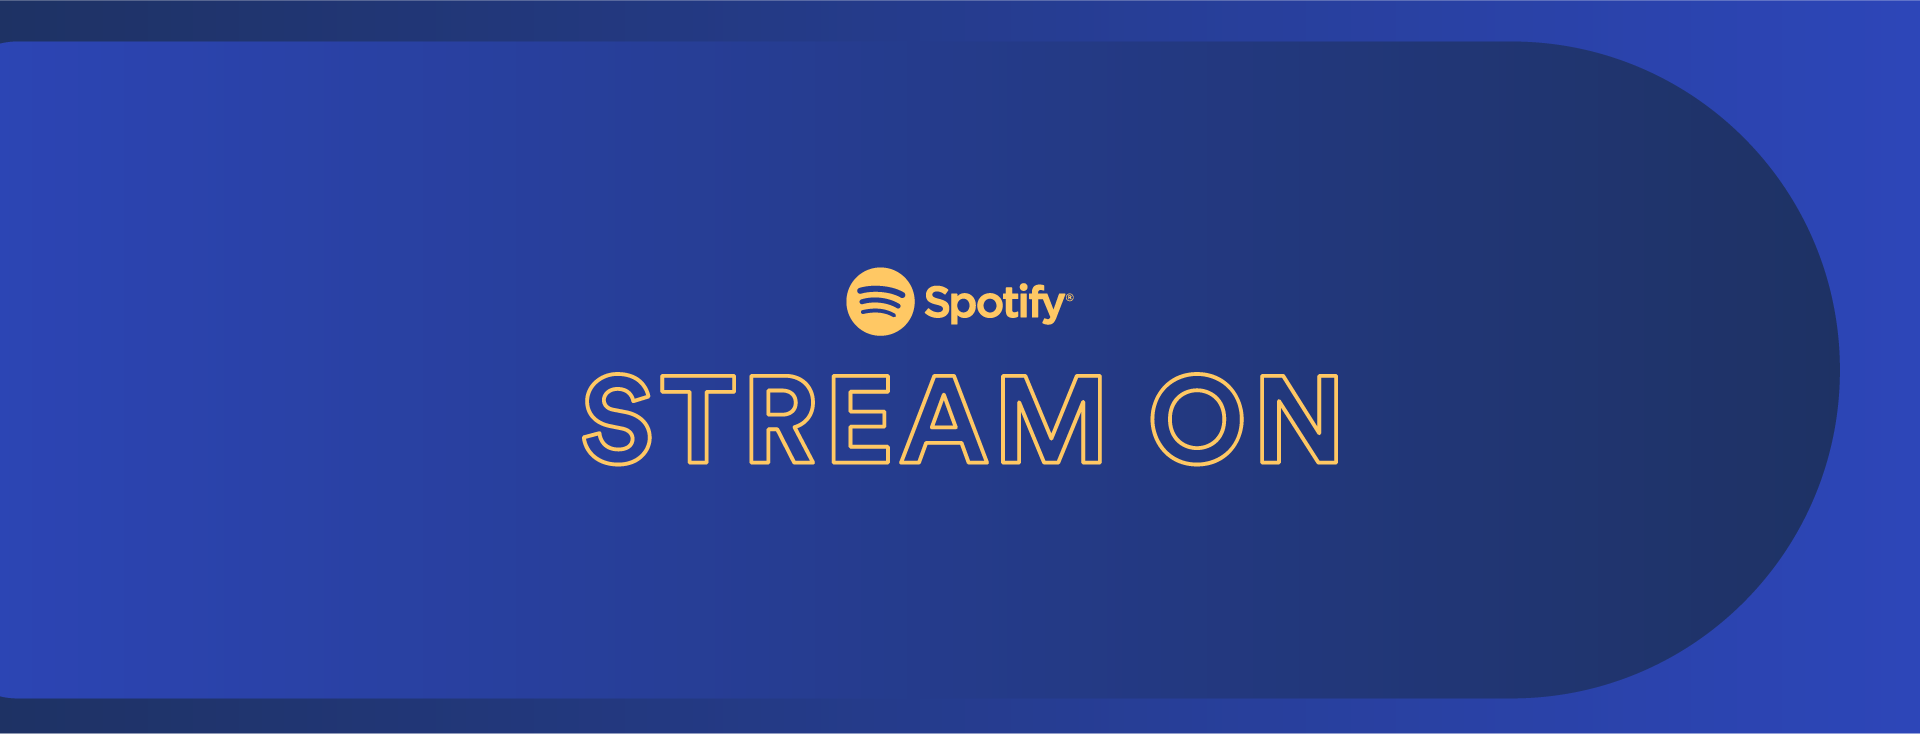 Spotify reveal they paid out over $5 billion to rights holders in 2020 and more stats from their Stream On event